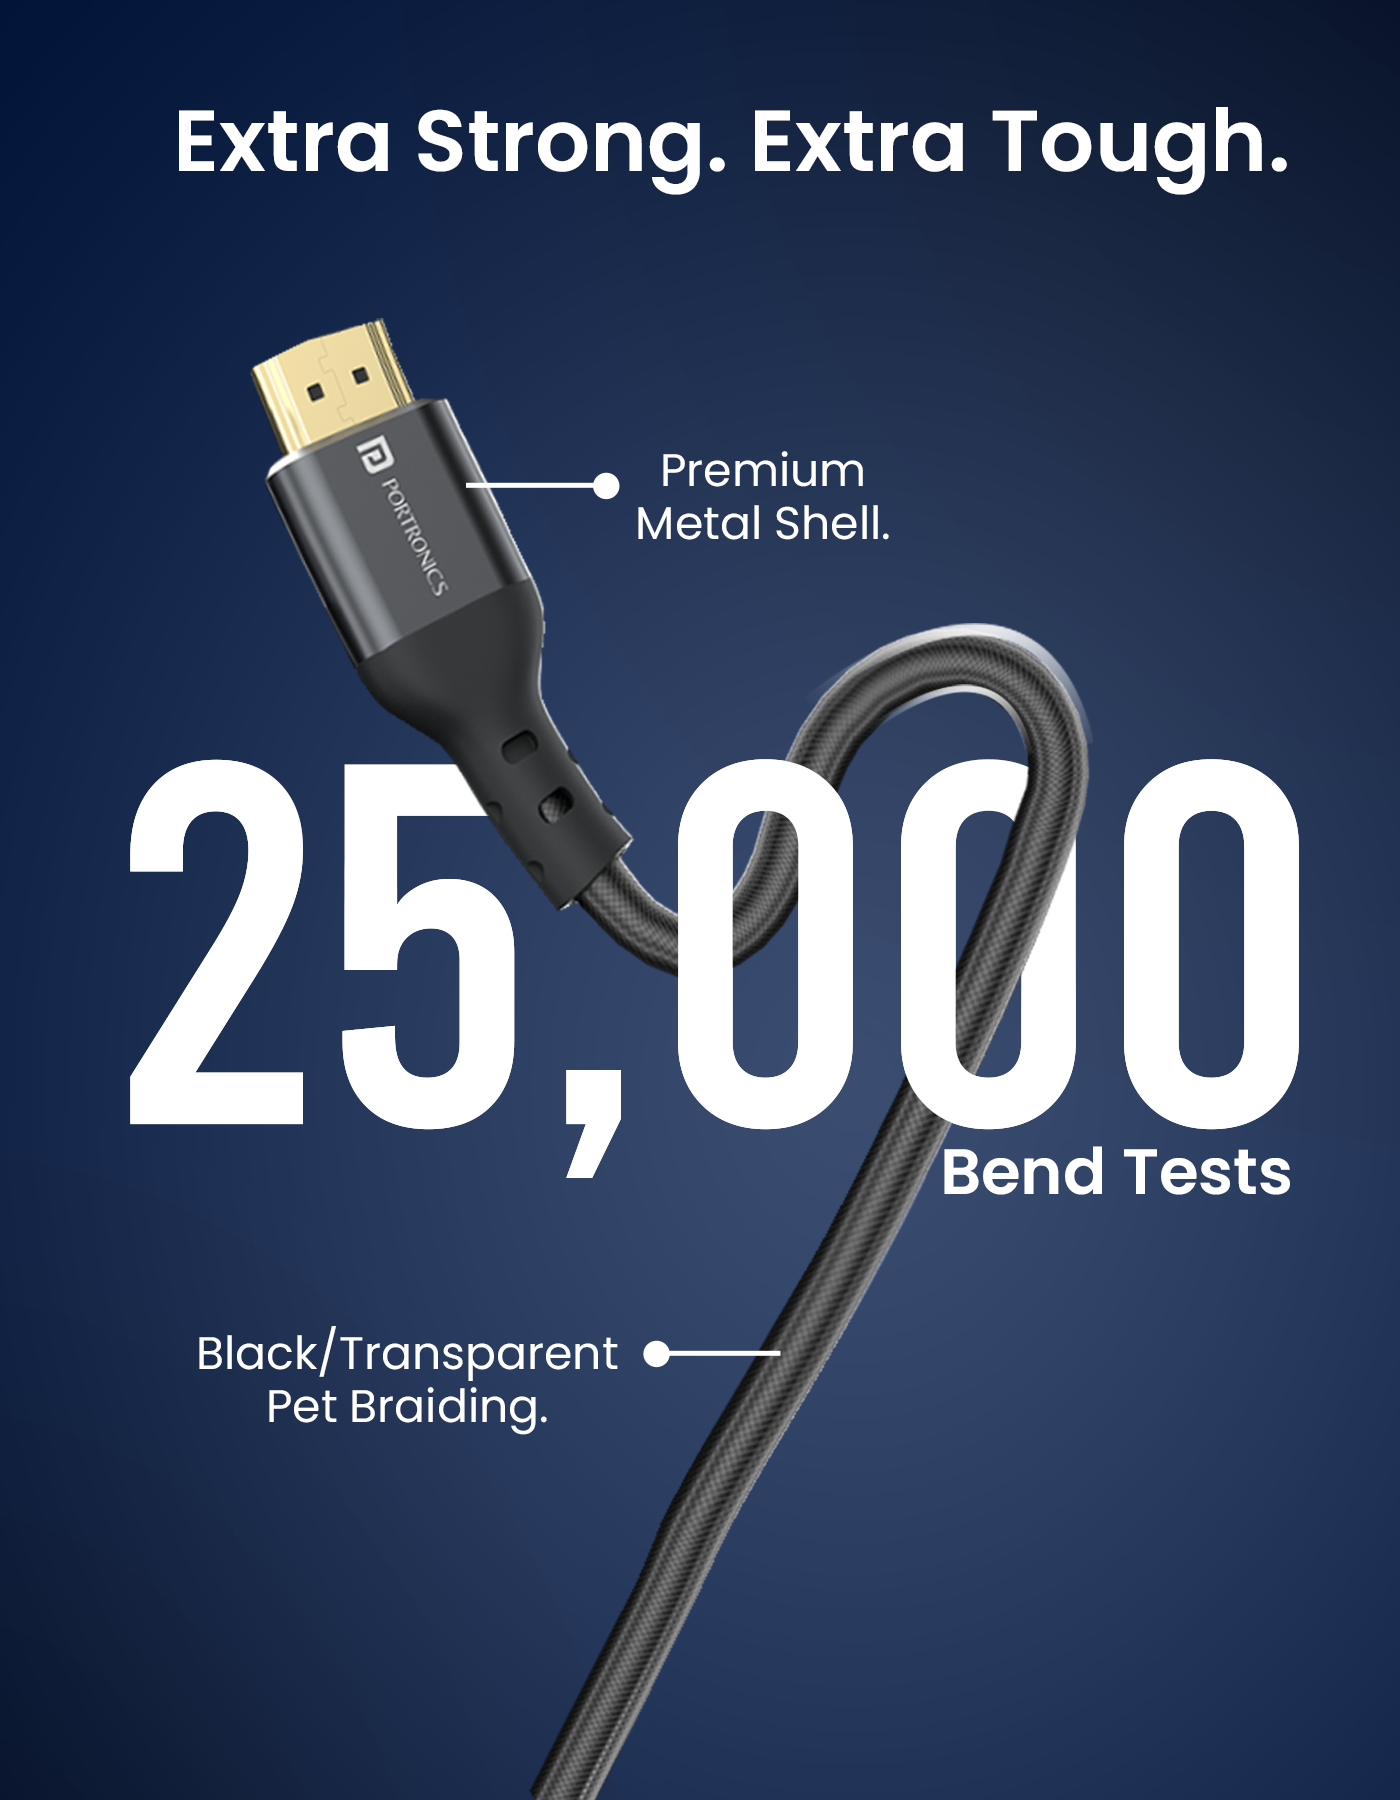 Portronics Konnect Stream 1.5M 4k hdmi to Hdmi cable with 25000 bend test for long life span